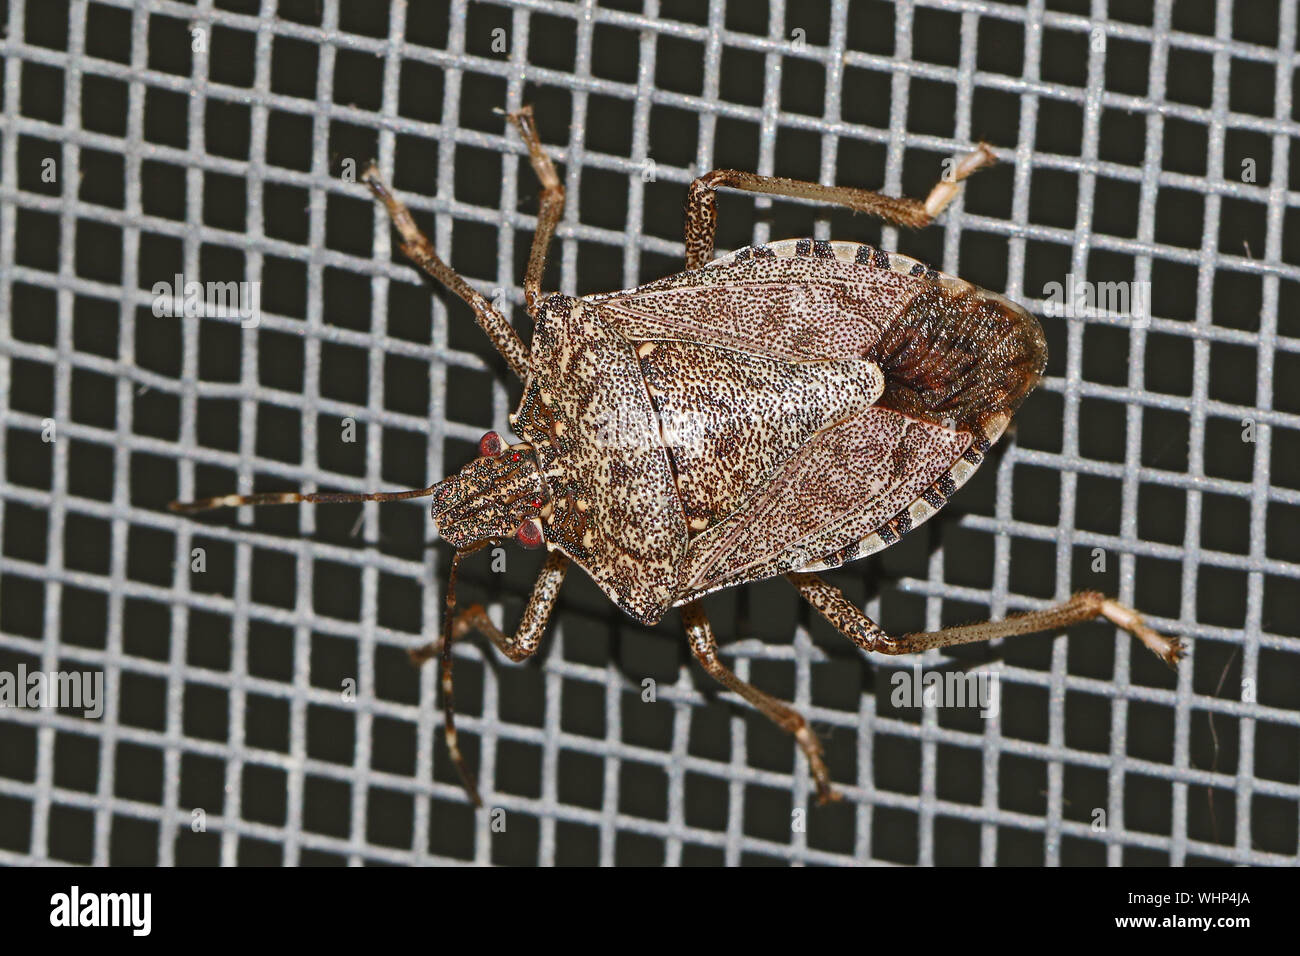 brown marmorated stink bug Latin halyomorpha halys from the pentatomidae family on a screen door in Italy a serious pest in Europe and the USA Stock Photo